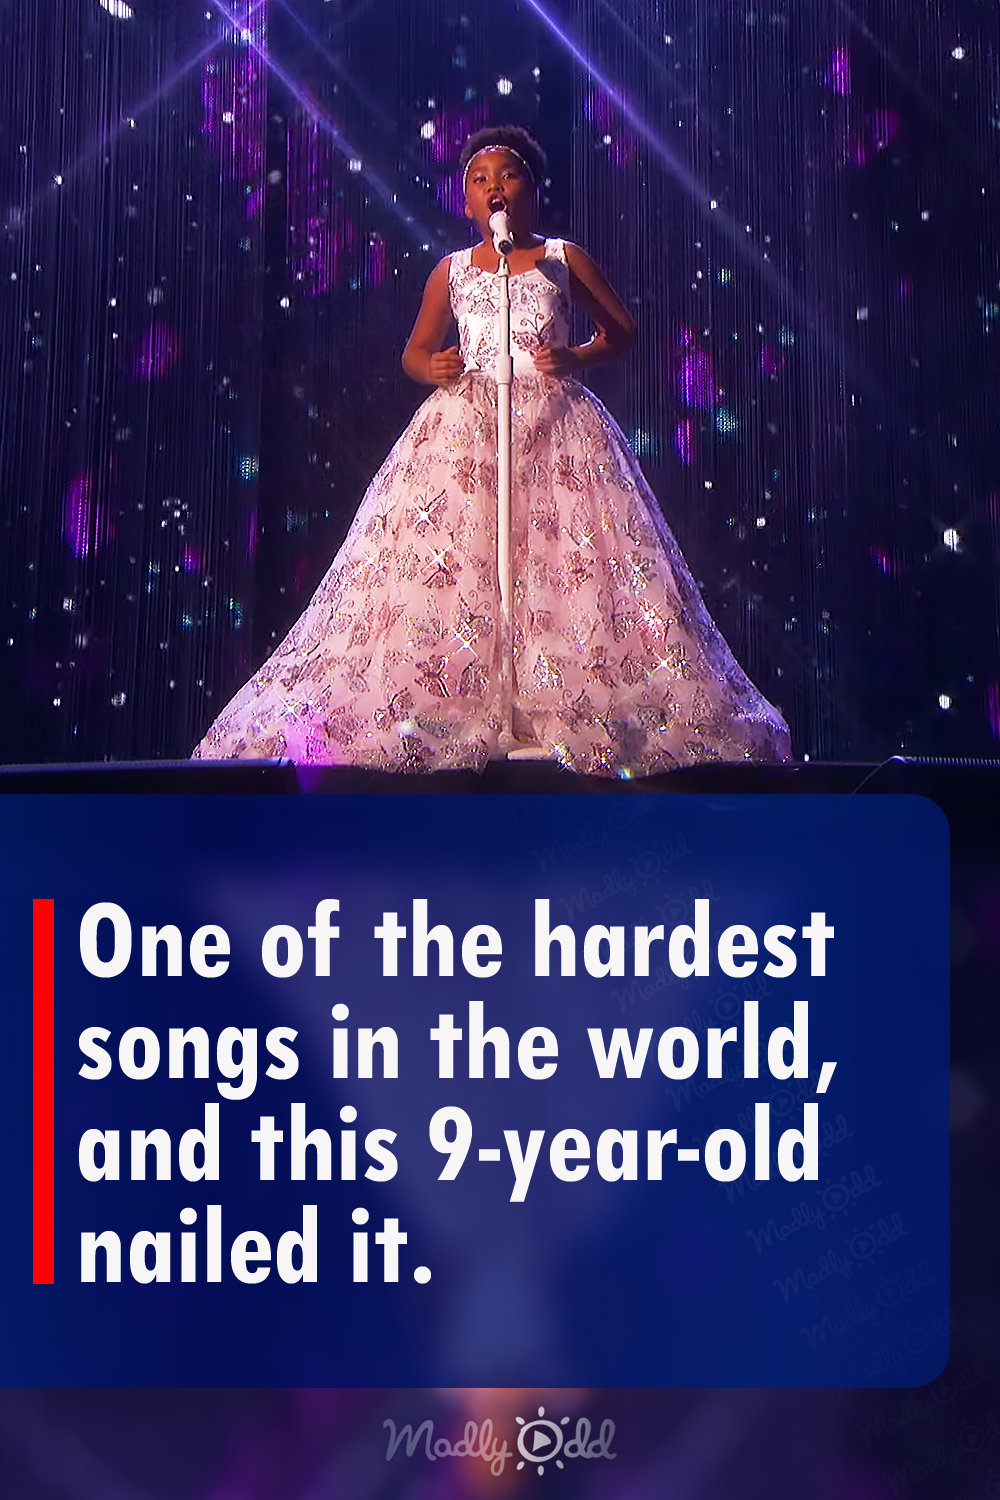 One of the hardest songs in the world, and this 9-year-old nailed it.